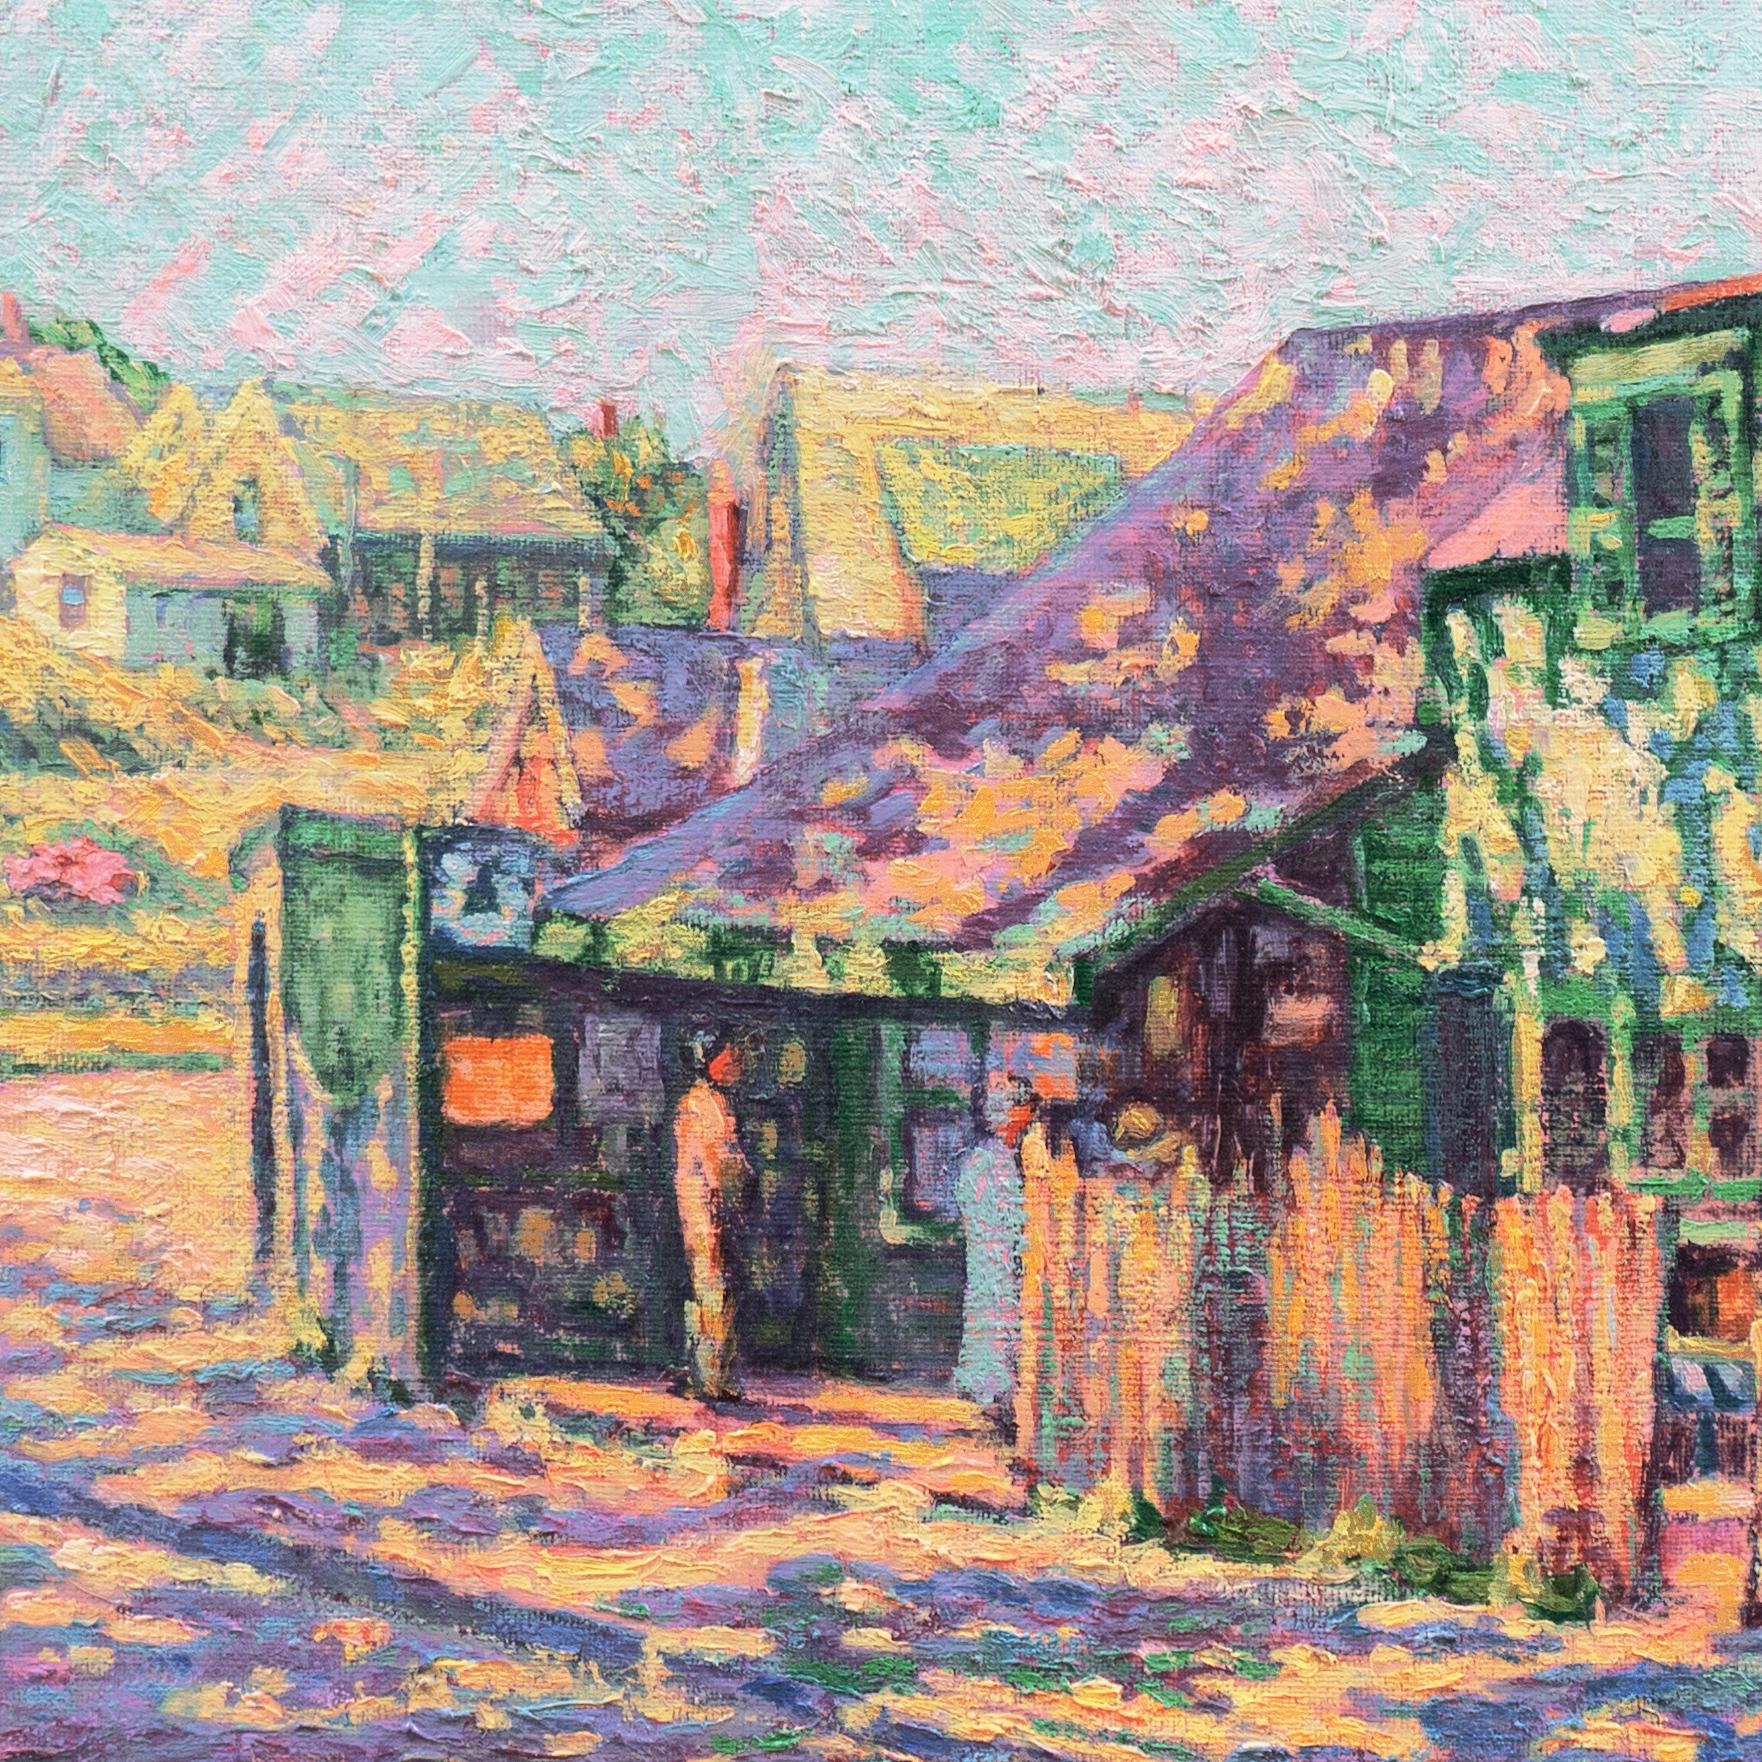 Attributed to Hortense Mattice Gordon (Canadian, 1886-1961) and painted circa 1925. Attribution based on similar style, composition and subject matter of McGill University's 'Old Country Store, Ontario' (1925) by the artist (see last image).

An